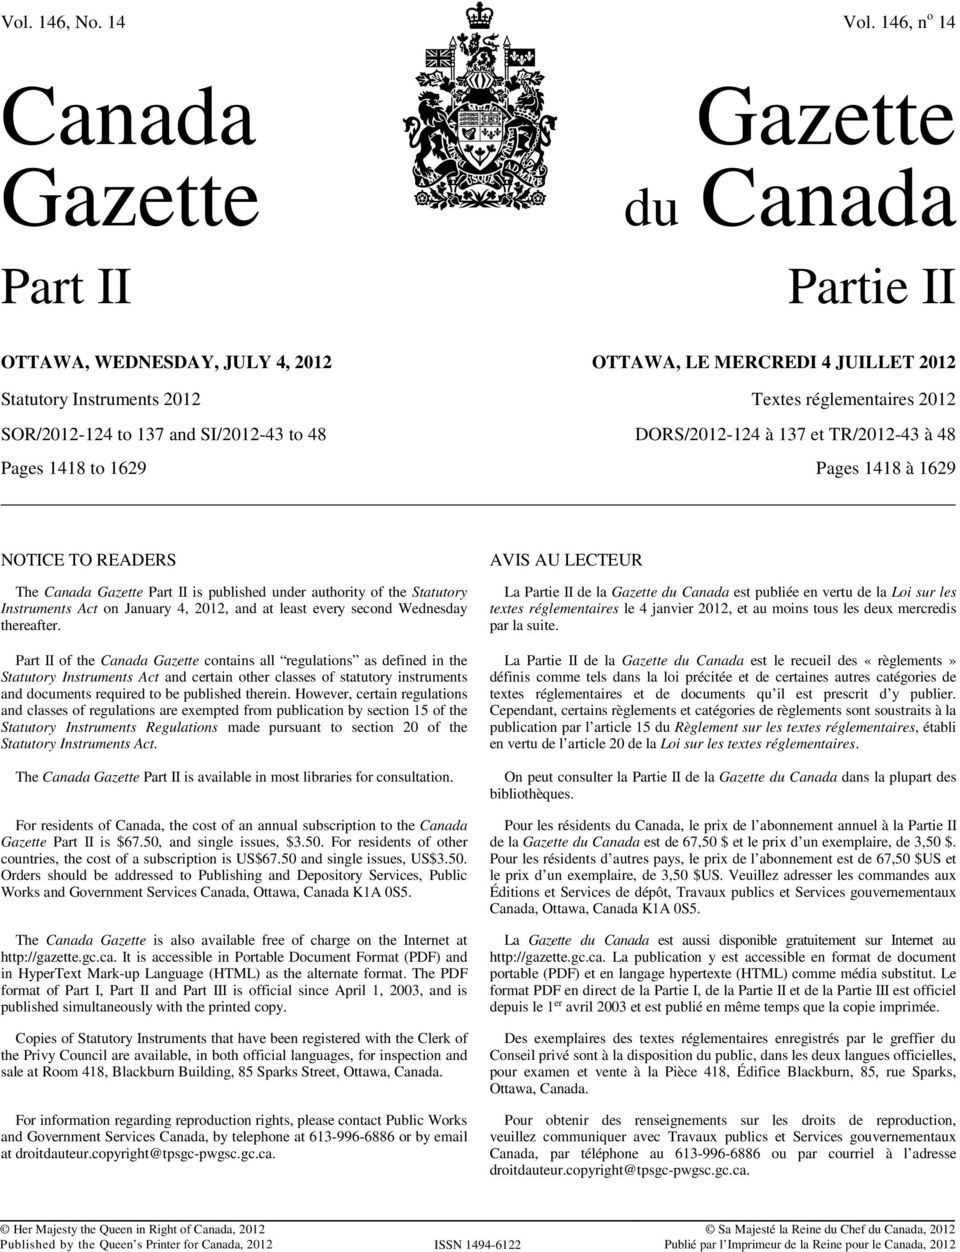 137 and SI/2012-43 to 48 DORS/2012-124 à 137 et TR/2012-43 à 48 Pages 1418 to 1629 Pages 1418 à 1629 NOTICE TO READERS The Canada Gazette Part II is published under authority of the Statutory